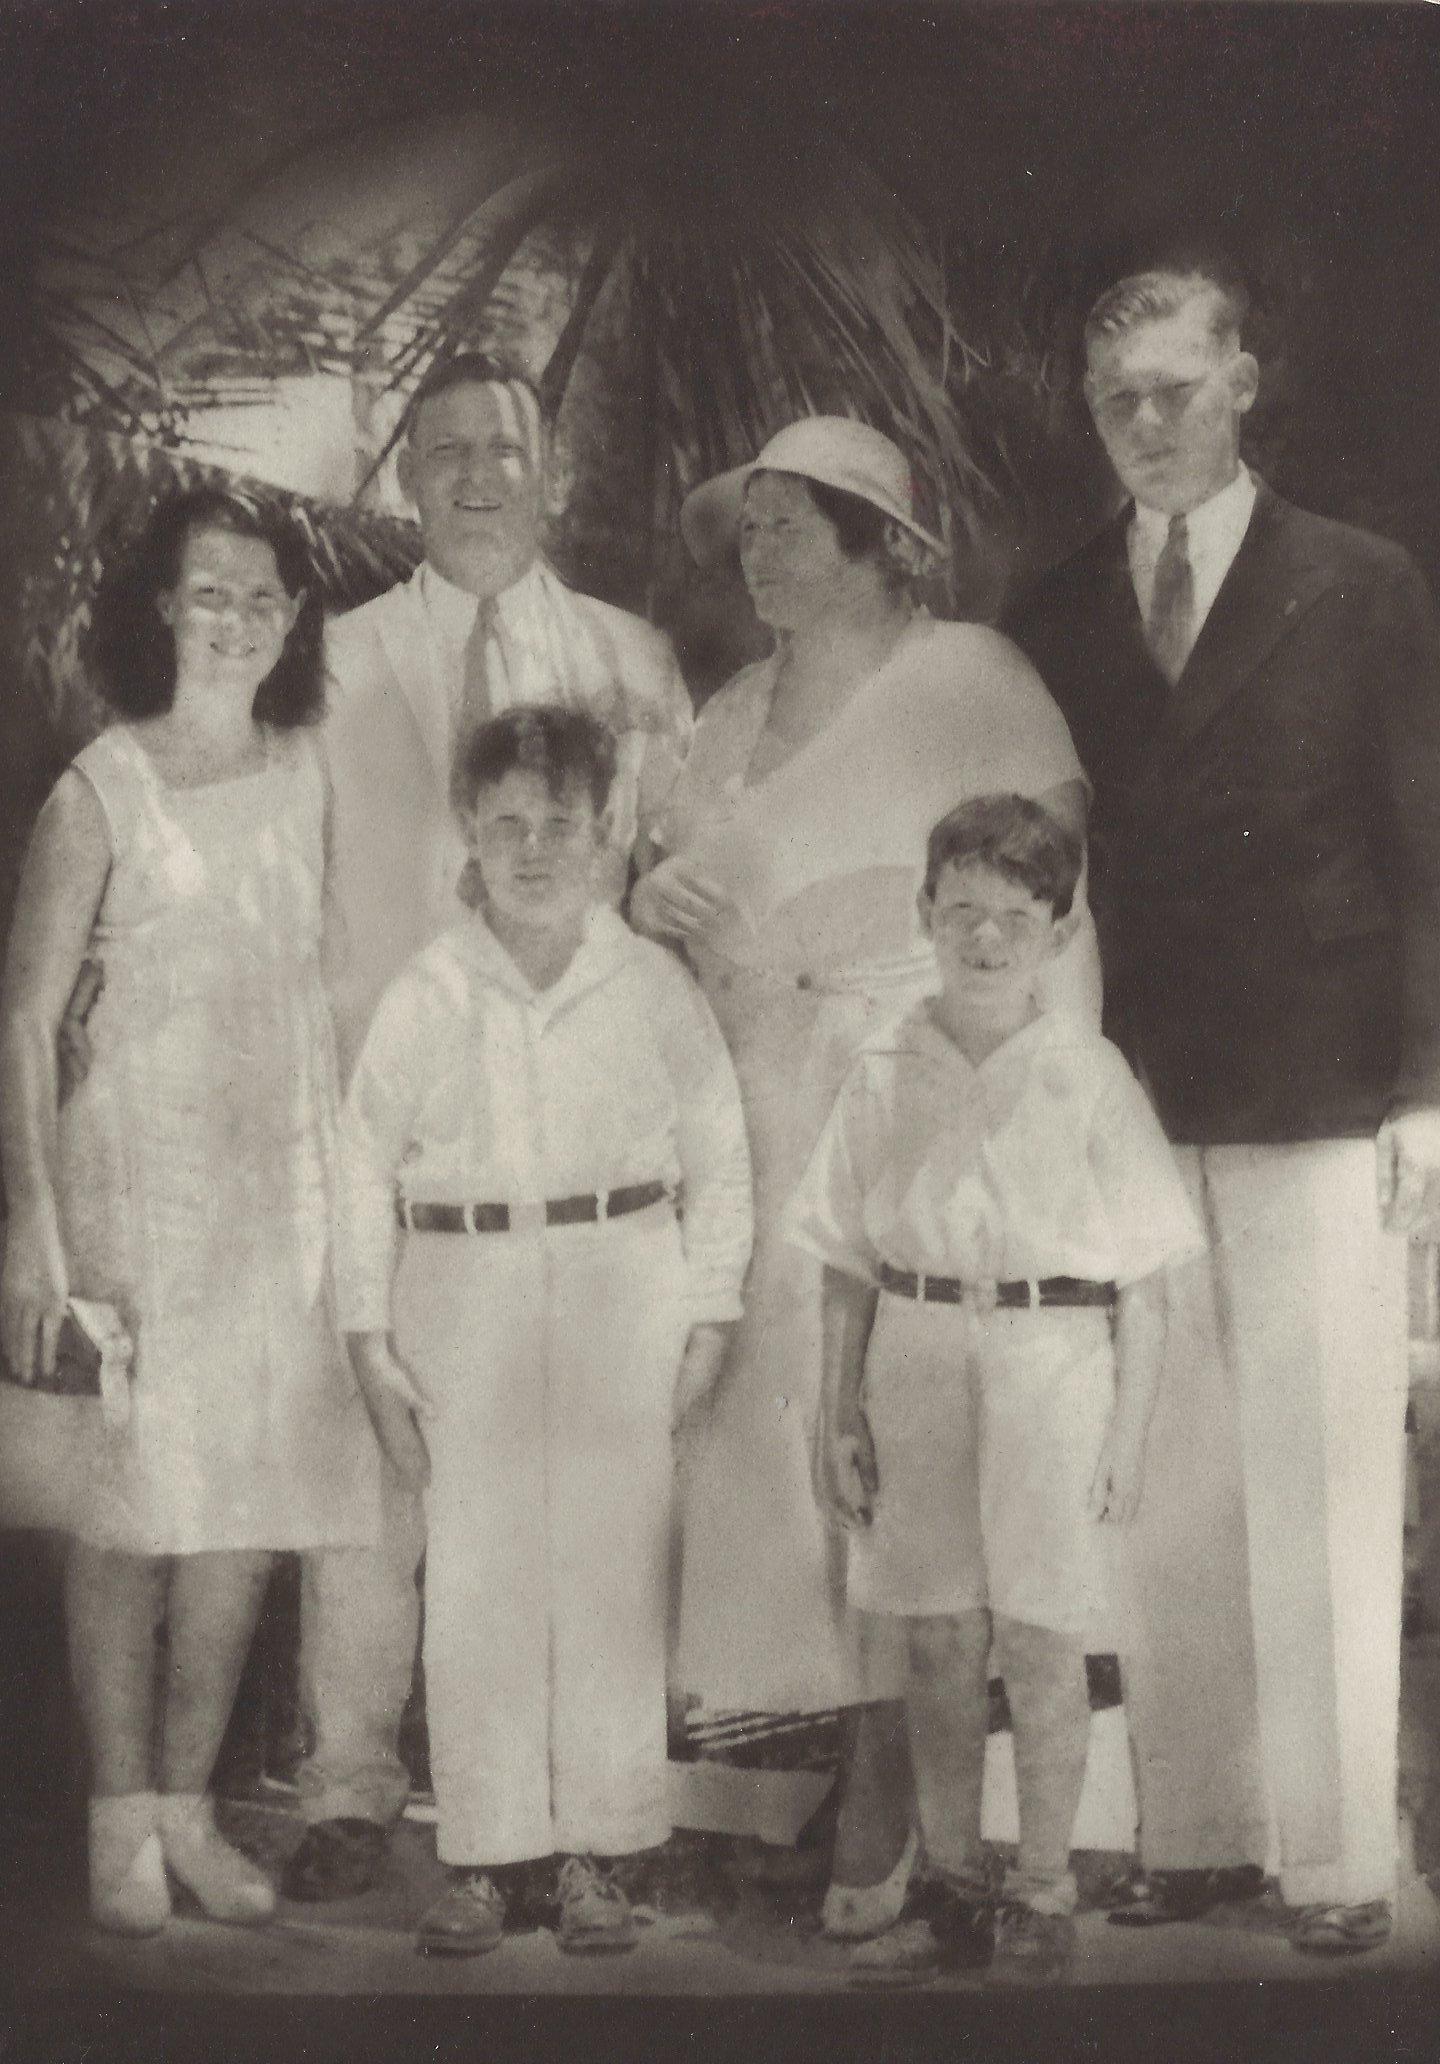 The Schechter family in Cuba in the early 1930s